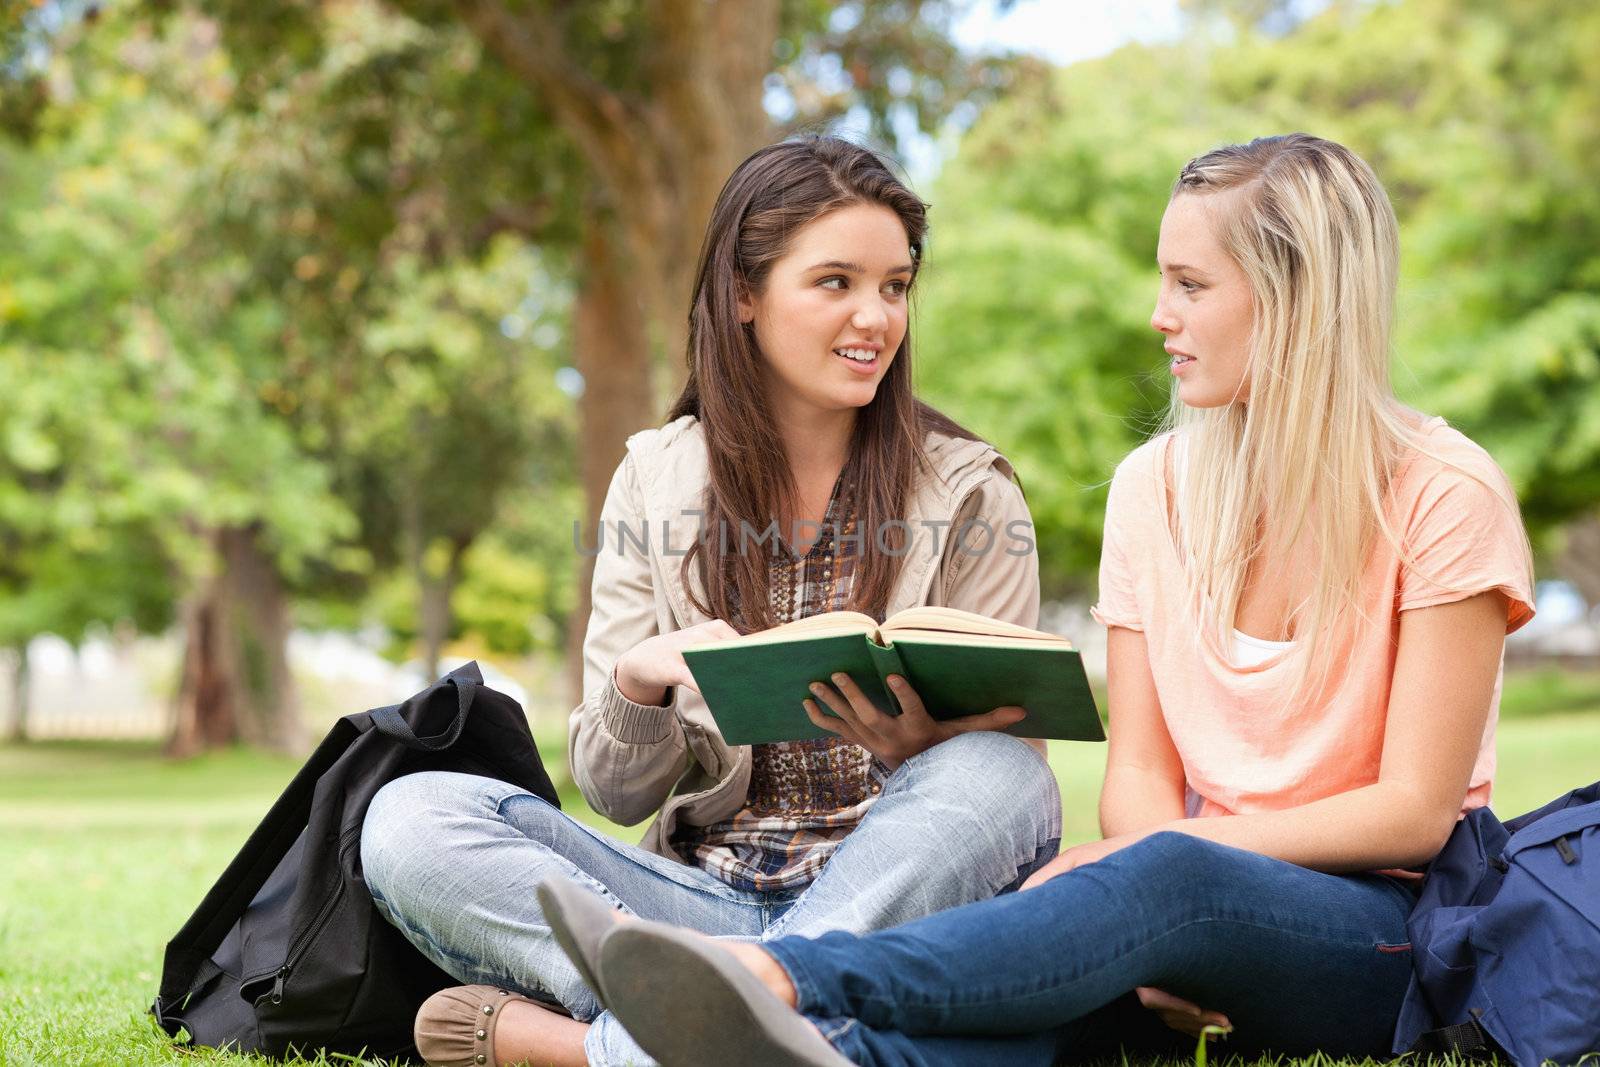 Female teenagers sitting while studying with a textbook by Wavebreakmedia